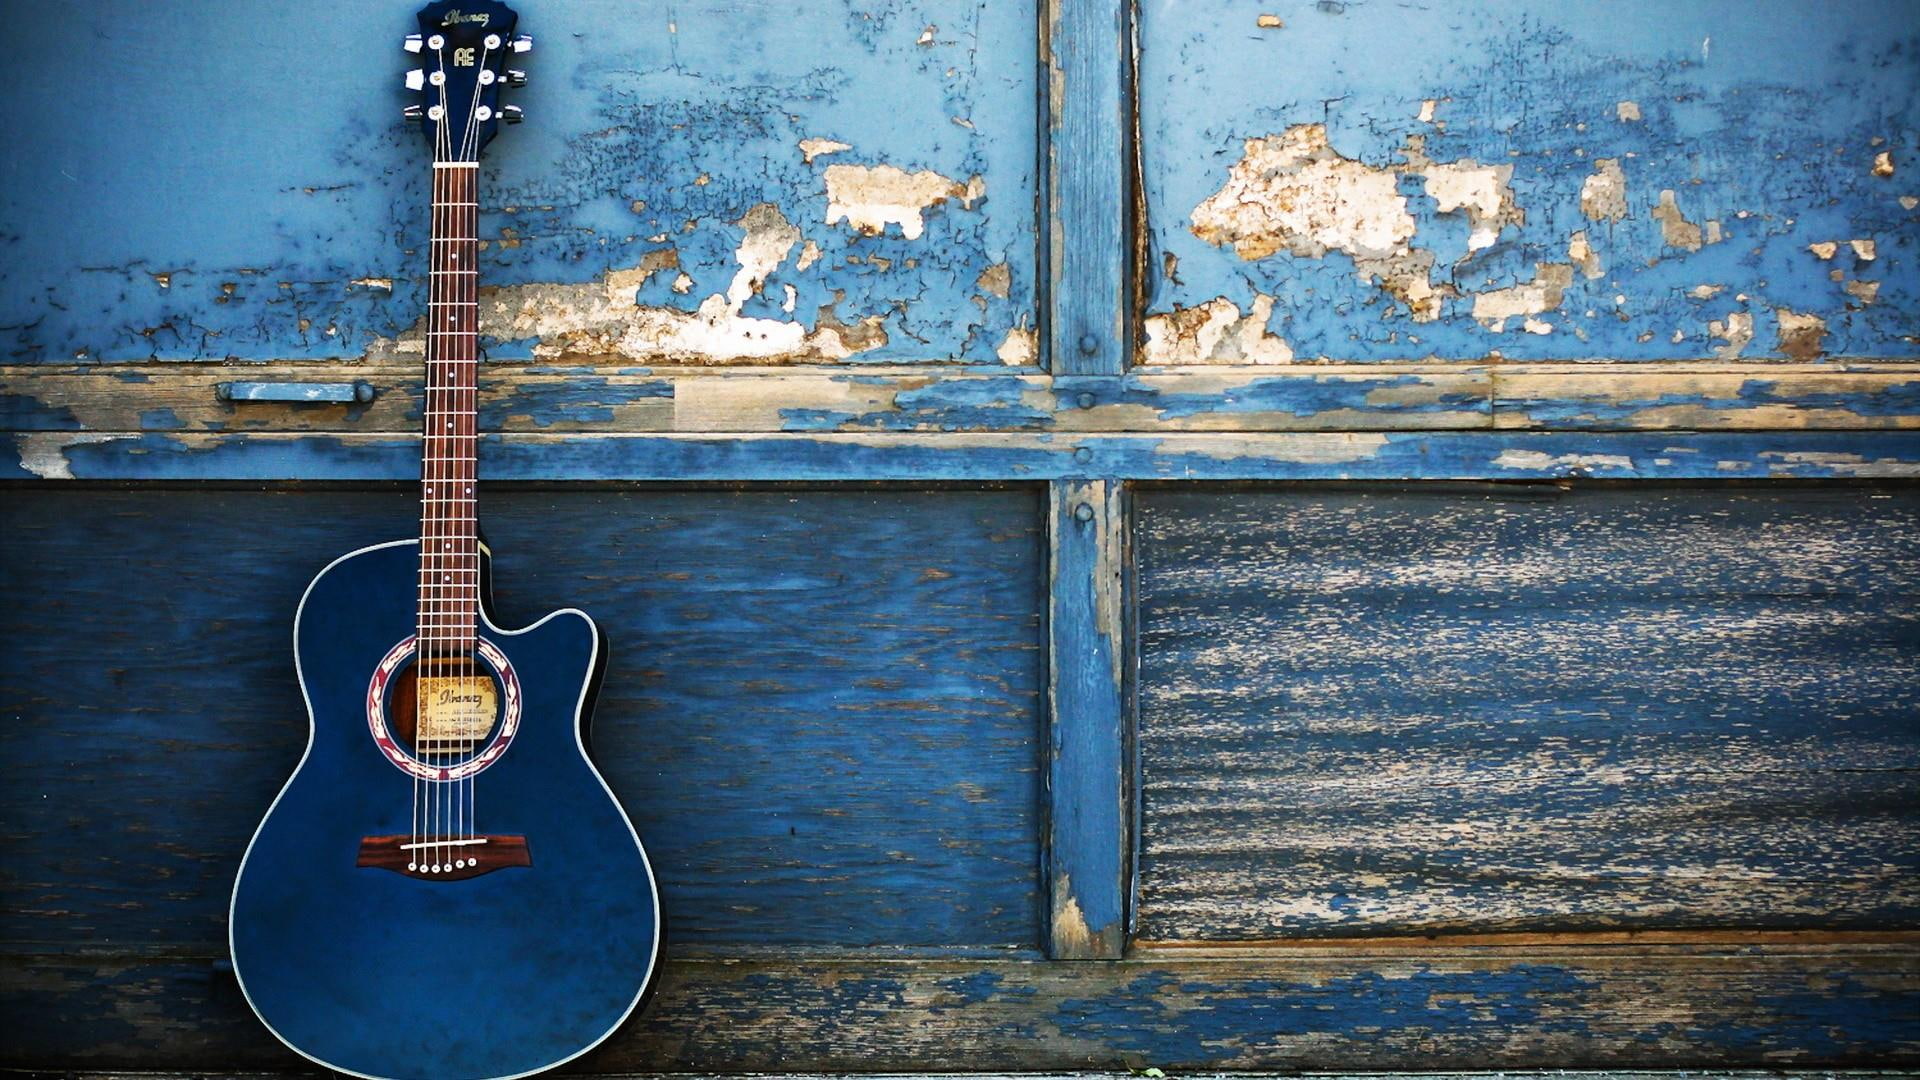 guitar, wall, blue, vintage, photography, musical instrument